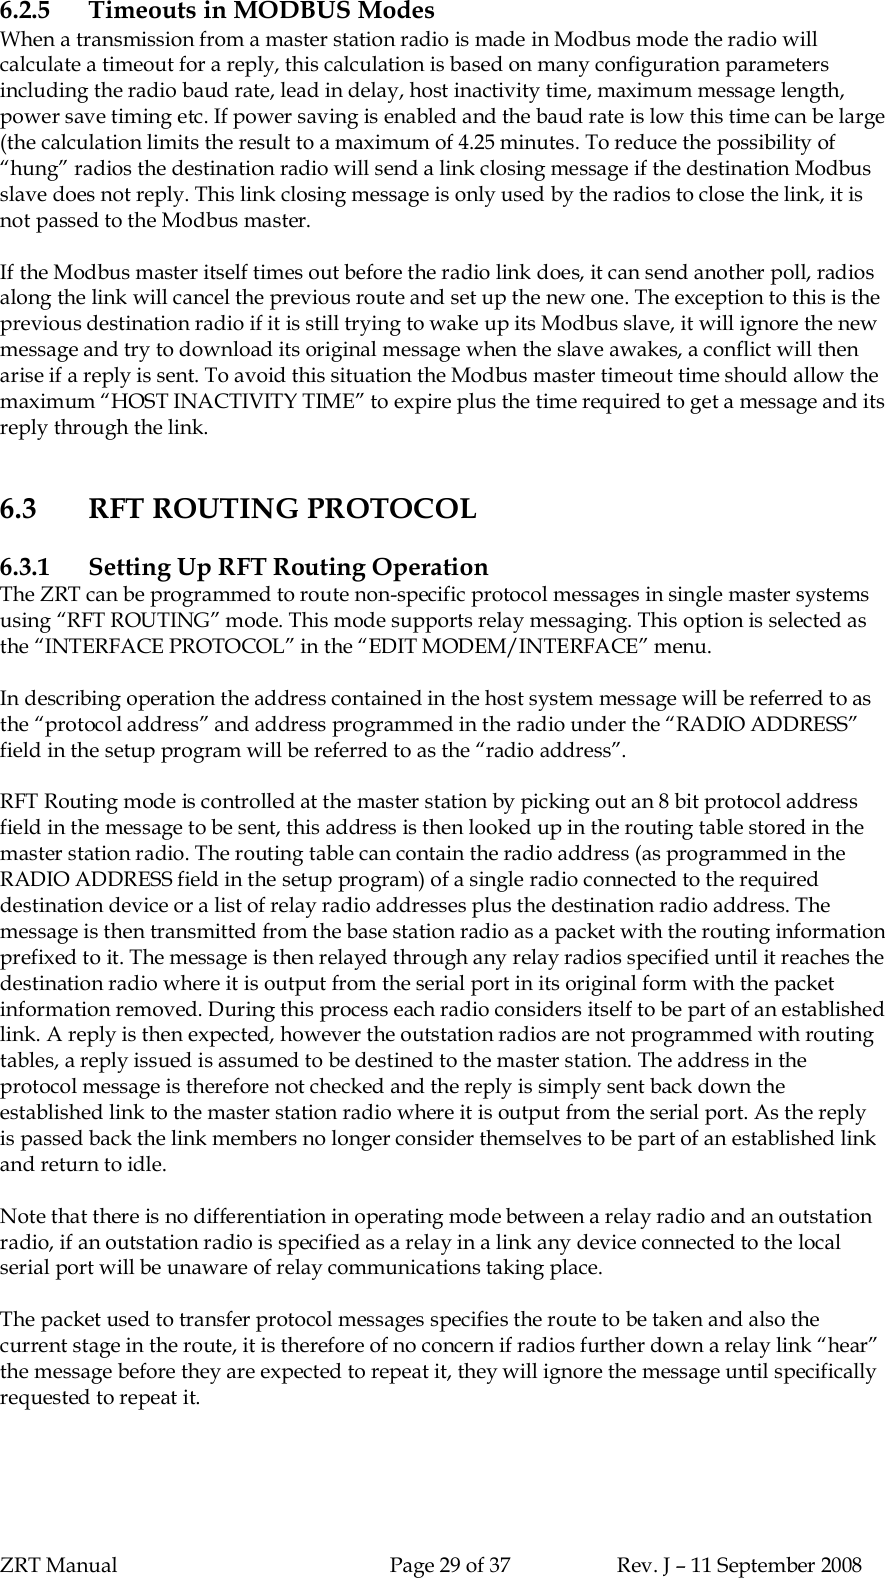 ZRT Manual Page 29 of 37 Rev. J – 11 September 20086.2.5 Timeouts in MODBUS ModesWhen a transmission from a master station radio is made in Modbus mode the radio willcalculate a timeout for a reply, this calculation is based on many configuration parametersincluding the radio baud rate, lead in delay, host inactivity time, maximum message length,power save timing etc. If power saving is enabled and the baud rate is low this time can be large(the calculation limits the result to a maximum of 4.25 minutes. To reduce the possibility of“hung” radios the destination radio will send a link closing message if the destination Modbusslave does not reply. This link closing message is only used by the radios to close the link, it isnot passed to the Modbus master.If the Modbus master itself times out before the radio link does, it can send another poll, radiosalong the link will cancel the previous route and set up the new one. The exception to this is theprevious destination radio if it is still trying to wake up its Modbus slave, it will ignore the newmessage and try to download its original message when the slave awakes, a conflict will thenarise if a reply is sent. To avoid this situation the Modbus master timeout time should allow themaximum “HOST INACTIVITY TIME” to expire plus the time required to get a message and itsreply through the link.6.3 RFT ROUTING PROTOCOL6.3.1 Setting Up RFT Routing OperationThe ZRT can be programmed to route non-specific protocol messages in single master systemsusing “RFT ROUTING” mode. This mode supports relay messaging. This option is selected asthe “INTERFACE PROTOCOL” in the “EDIT MODEM/INTERFACE” menu.In describing operation the address contained in the host system message will be referred to asthe “protocol address” and address programmed in the radio under the “RADIO ADDRESS”field in the setup program will be referred to as the “radio address”.RFT Routing mode is controlled at the master station by picking out an 8 bit protocol addressfield in the message to be sent, this address is then looked up in the routing table stored in themaster station radio. The routing table can contain the radio address (as programmed in theRADIO ADDRESS field in the setup program) of a single radio connected to the requireddestination device or a list of relay radio addresses plus the destination radio address. Themessage is then transmitted from the base station radio as a packet with the routing informationprefixed to it. The message is then relayed through any relay radios specified until it reaches thedestination radio where it is output from the serial port in its original form with the packetinformation removed. During this process each radio considers itself to be part of an establishedlink. A reply is then expected, however the outstation radios are not programmed with routingtables, a reply issued is assumed to be destined to the master station. The address in theprotocol message is therefore not checked and the reply is simply sent back down theestablished link to the master station radio where it is output from the serial port. As the replyis passed back the link members no longer consider themselves to be part of an established linkand return to idle.Note that there is no differentiation in operating mode between a relay radio and an outstationradio, if an outstation radio is specified as a relay in a link any device connected to the localserial port will be unaware of relay communications taking place.The packet used to transfer protocol messages specifies the route to be taken and also thecurrent stage in the route, it is therefore of no concern if radios further down a relay link “hear”the message before they are expected to repeat it, they will ignore the message until specificallyrequested to repeat it.